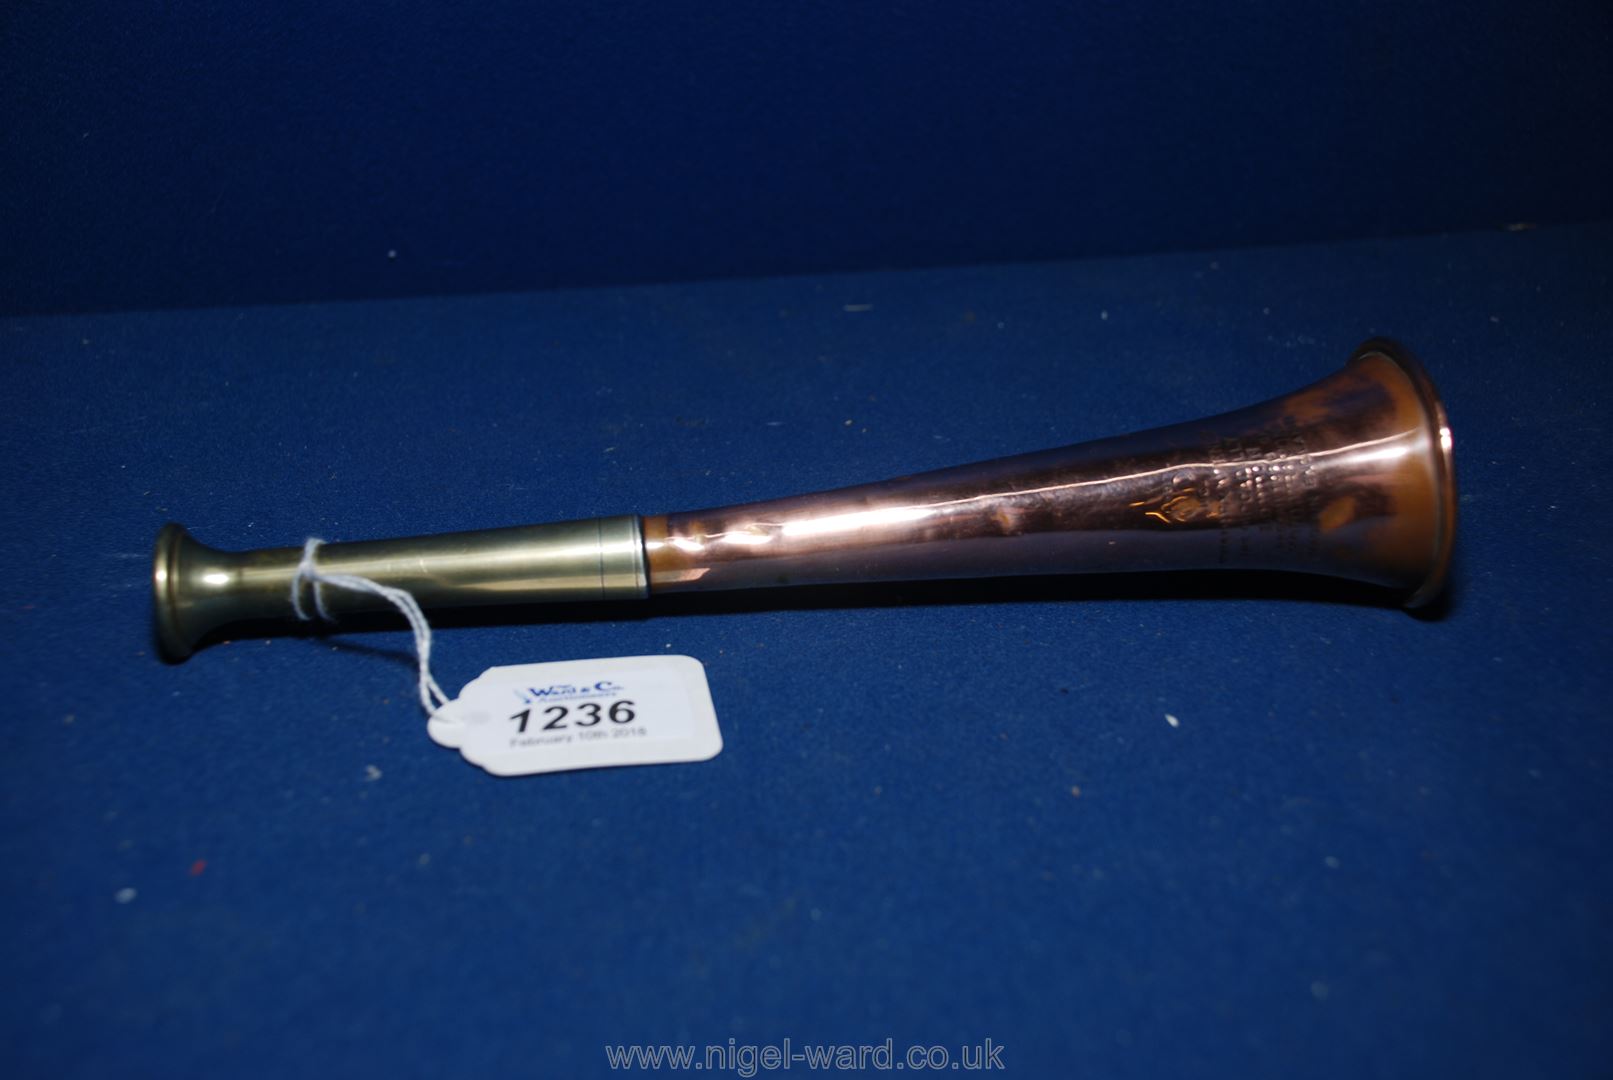 A brass Hunting Horn by Swaine & Adeney, 185 Piccadilly, London, Proprietors of Kohler & Son, - Image 2 of 2